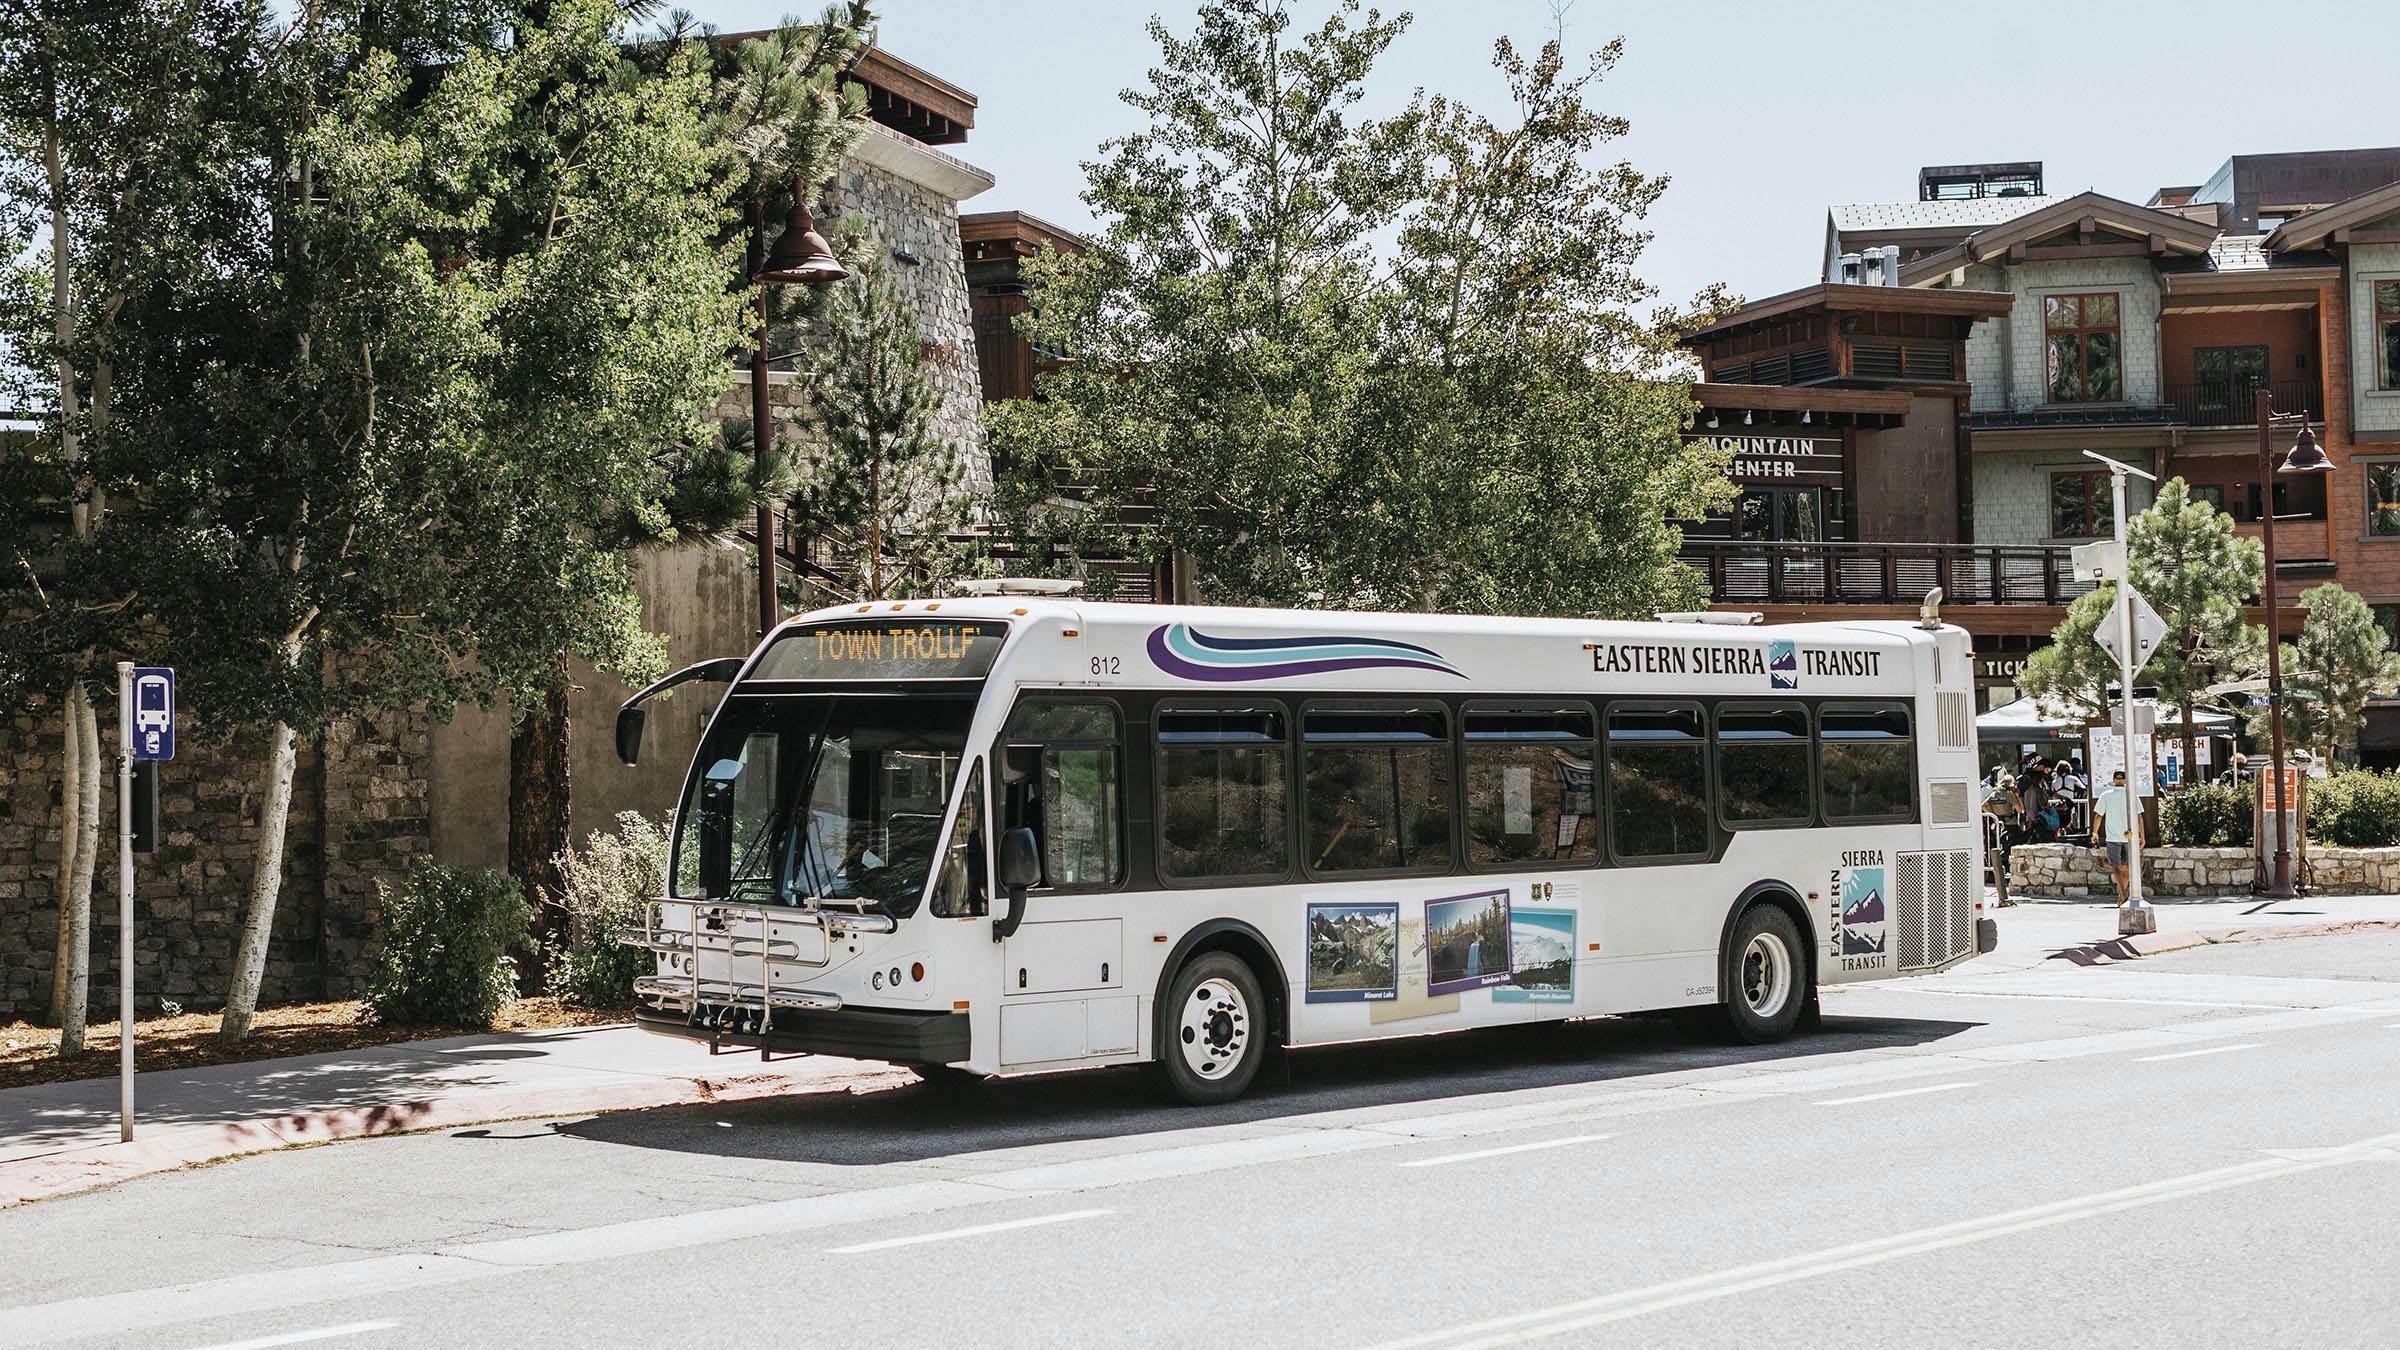 Eastern Sierra Transit Shuttle Bus at the Village at Mammoth